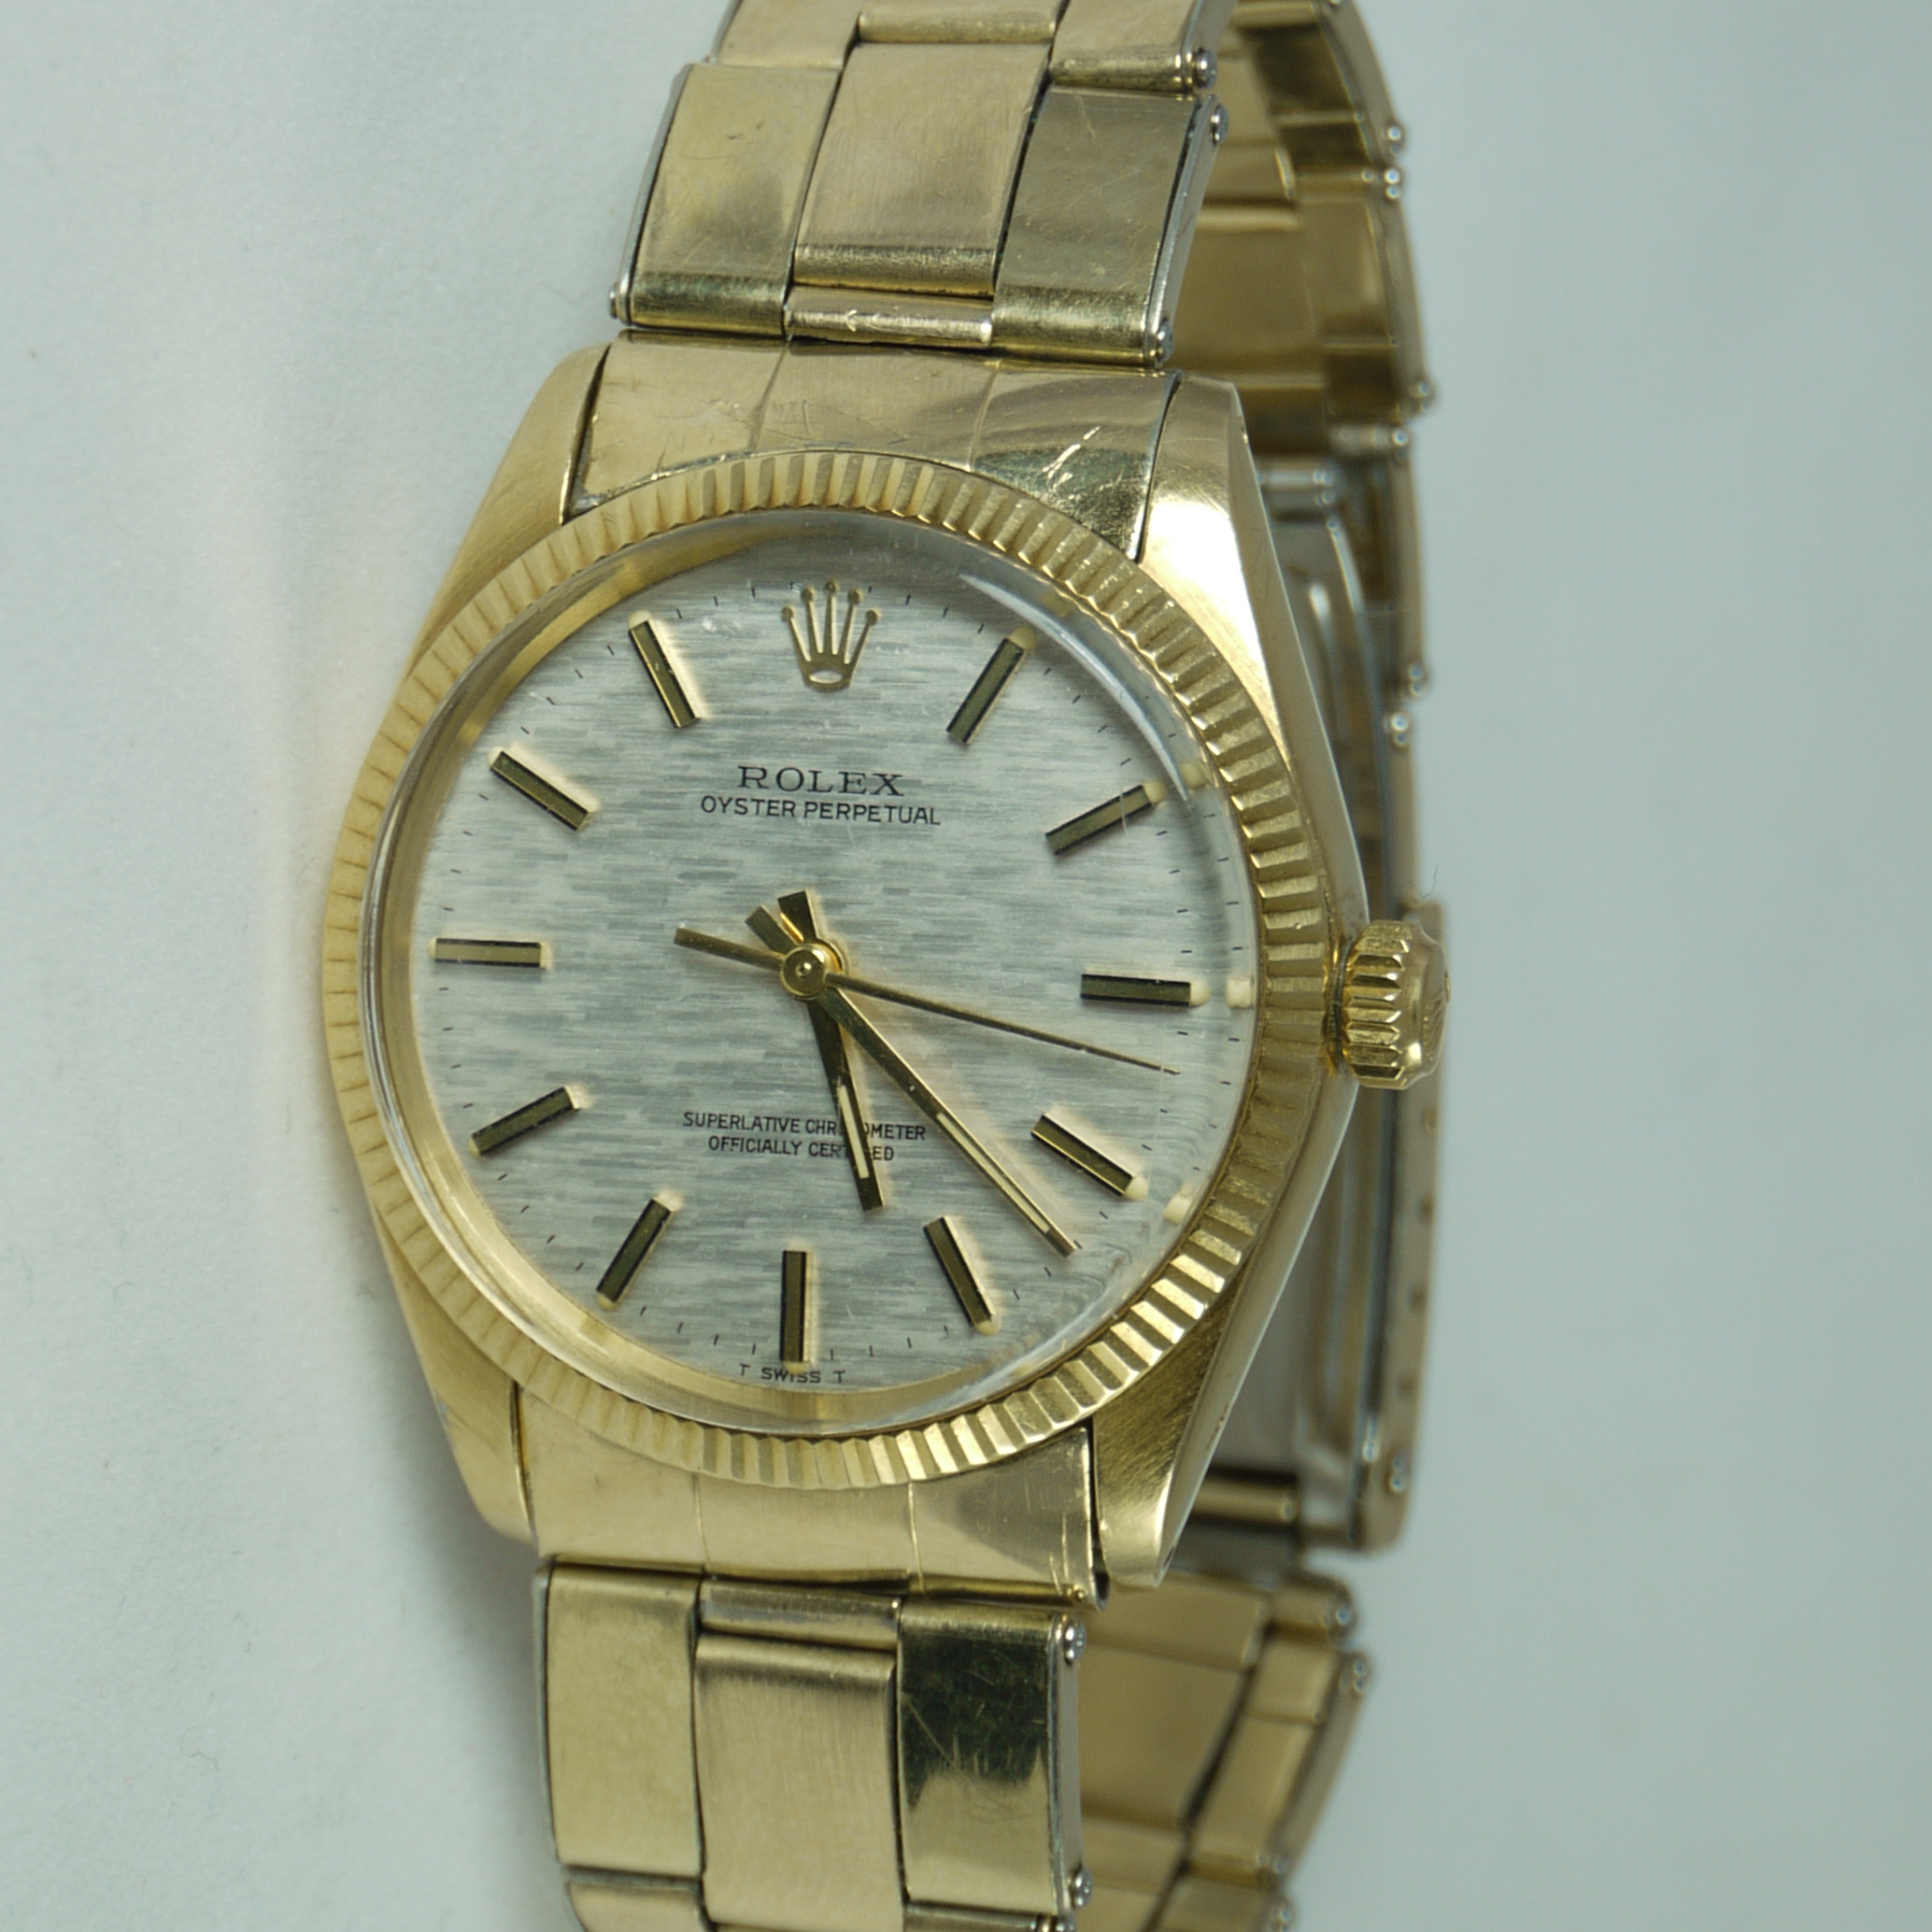 1971 Rolex 1005 Oyster Perpetual Chronometer wristwatch in 18 karat yellow gold with original gold band